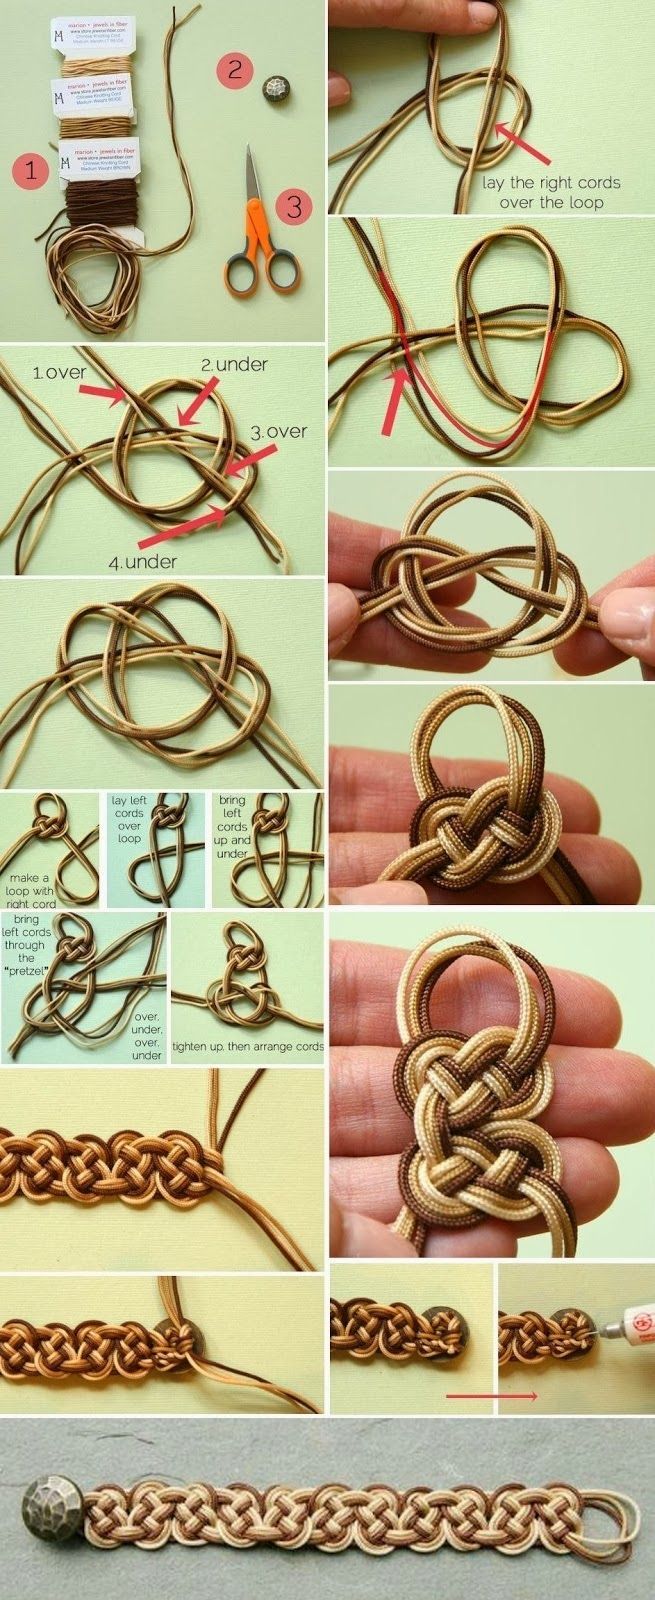 Lovely ombre celtic knot bracelet tutorial. Pinning this for @Gale L. because I know she loves Celtic knots.